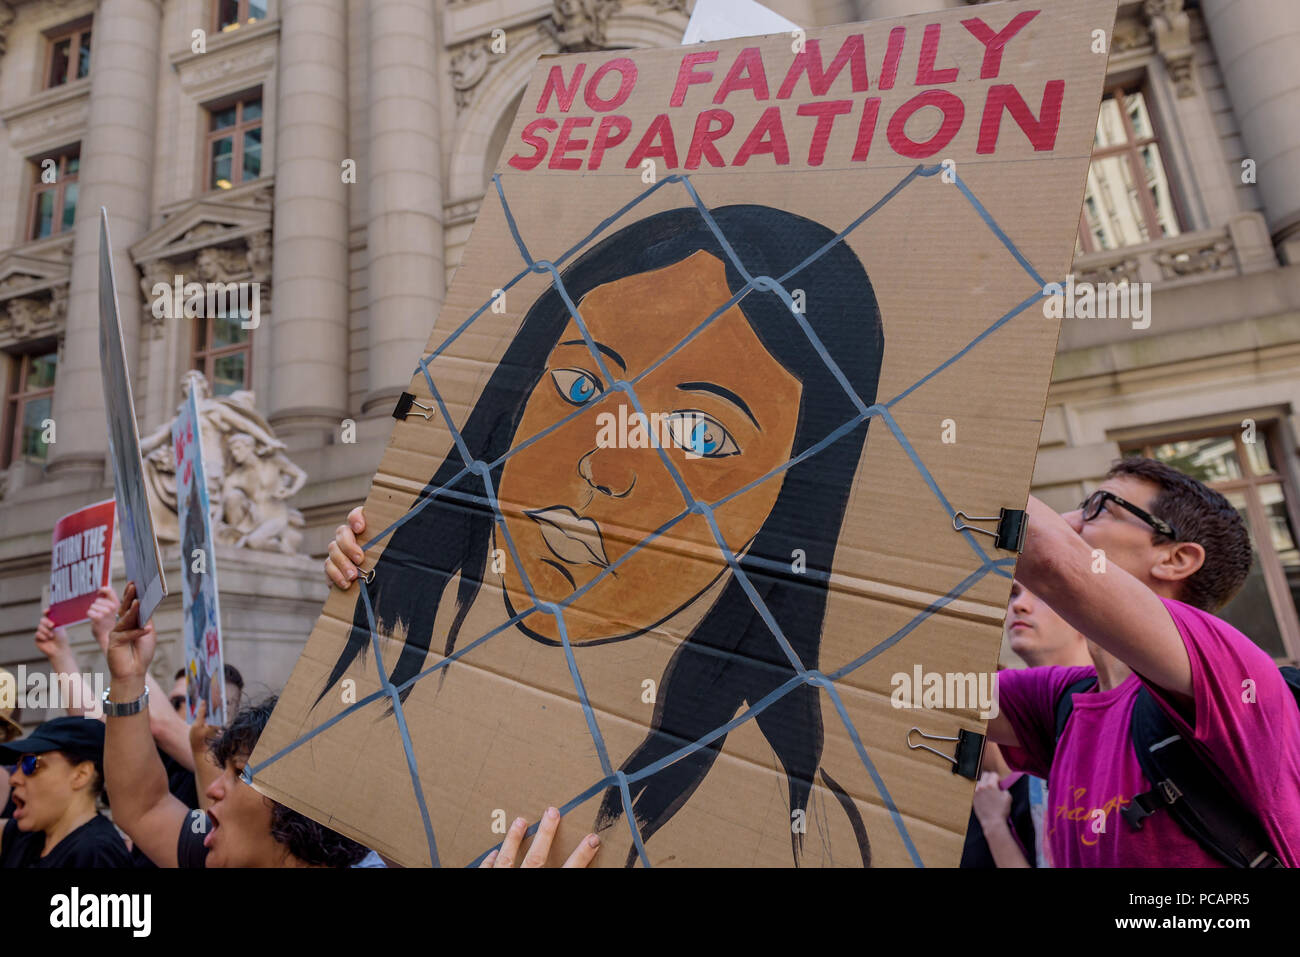 New York, United States. 31st July, 2018. Immigration advocates seeking to Abolish ICE gathered on July 31, 2018 outside the Alexander Hamilton Custom House in Bowling Green where DHS Secretary Kirstjen Nielsen and Vice President Mike Pence attended a DHS conference, to demand that Secretary Nielsen and VP Pence reunite the families cruelly separated through anti-immigrant policies. Credit: Erik McGregor/Pacific Press/Alamy Live News Stock Photo